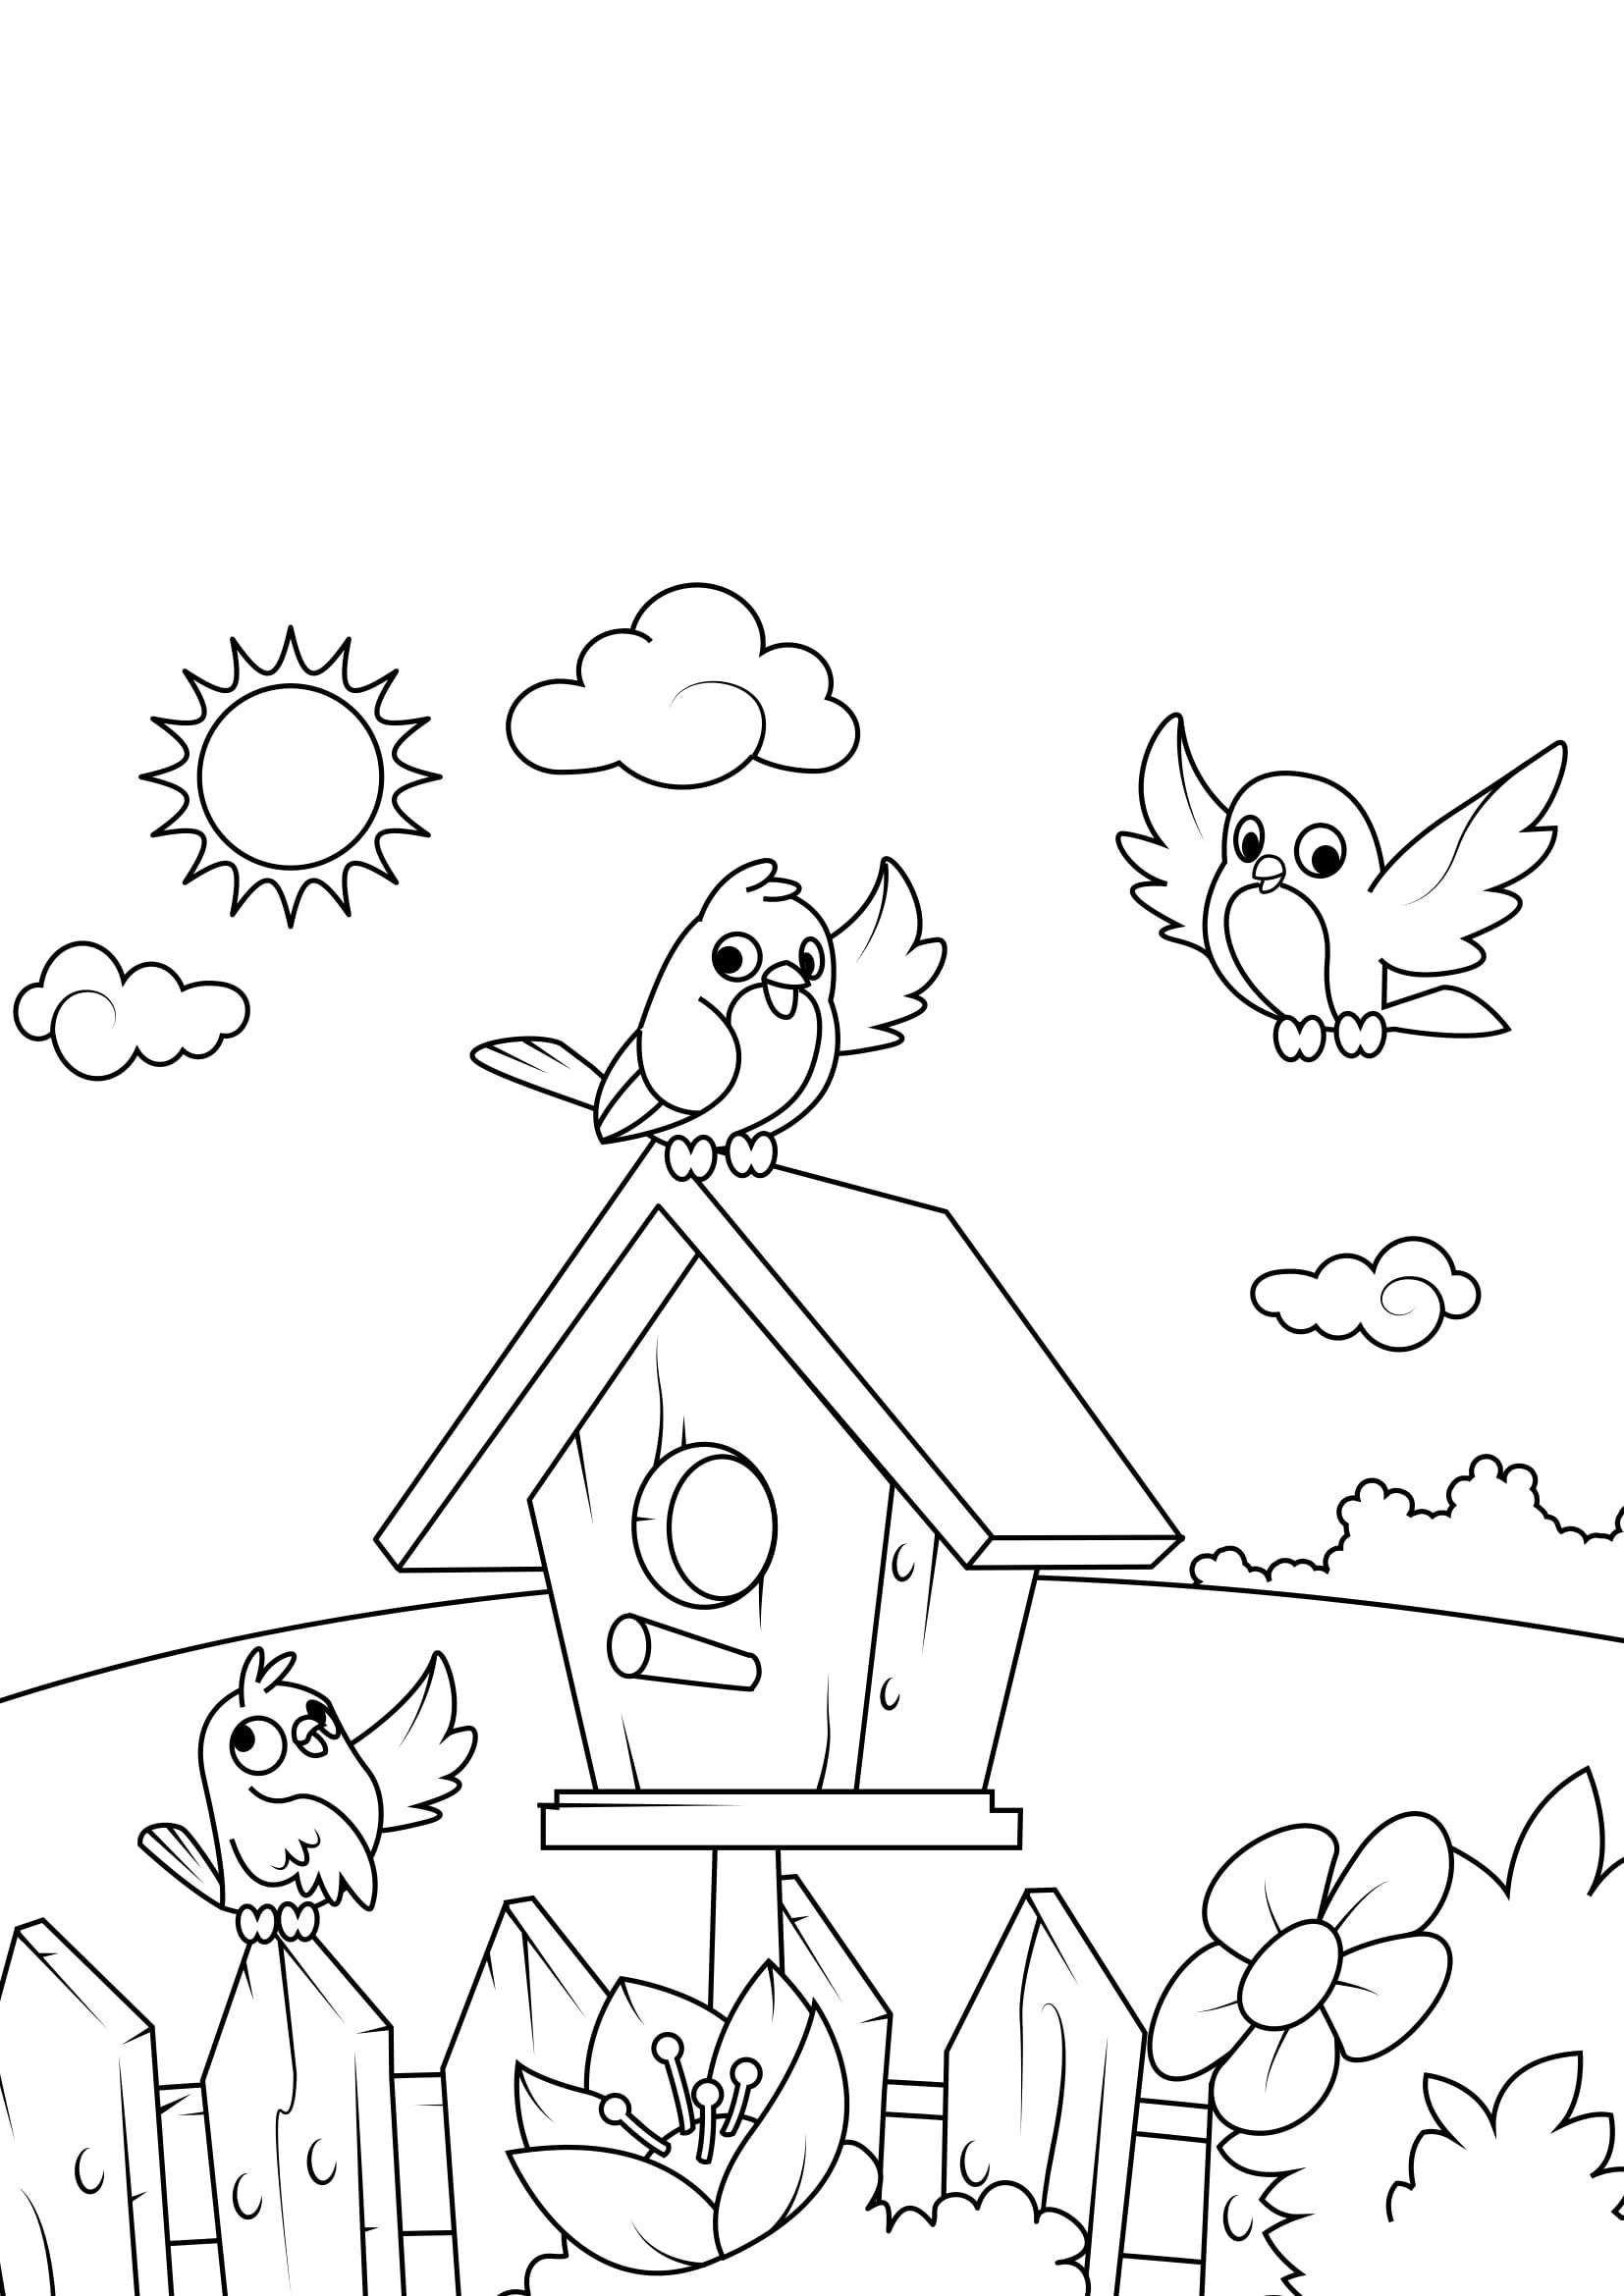 Coloring page spring, birdhouse